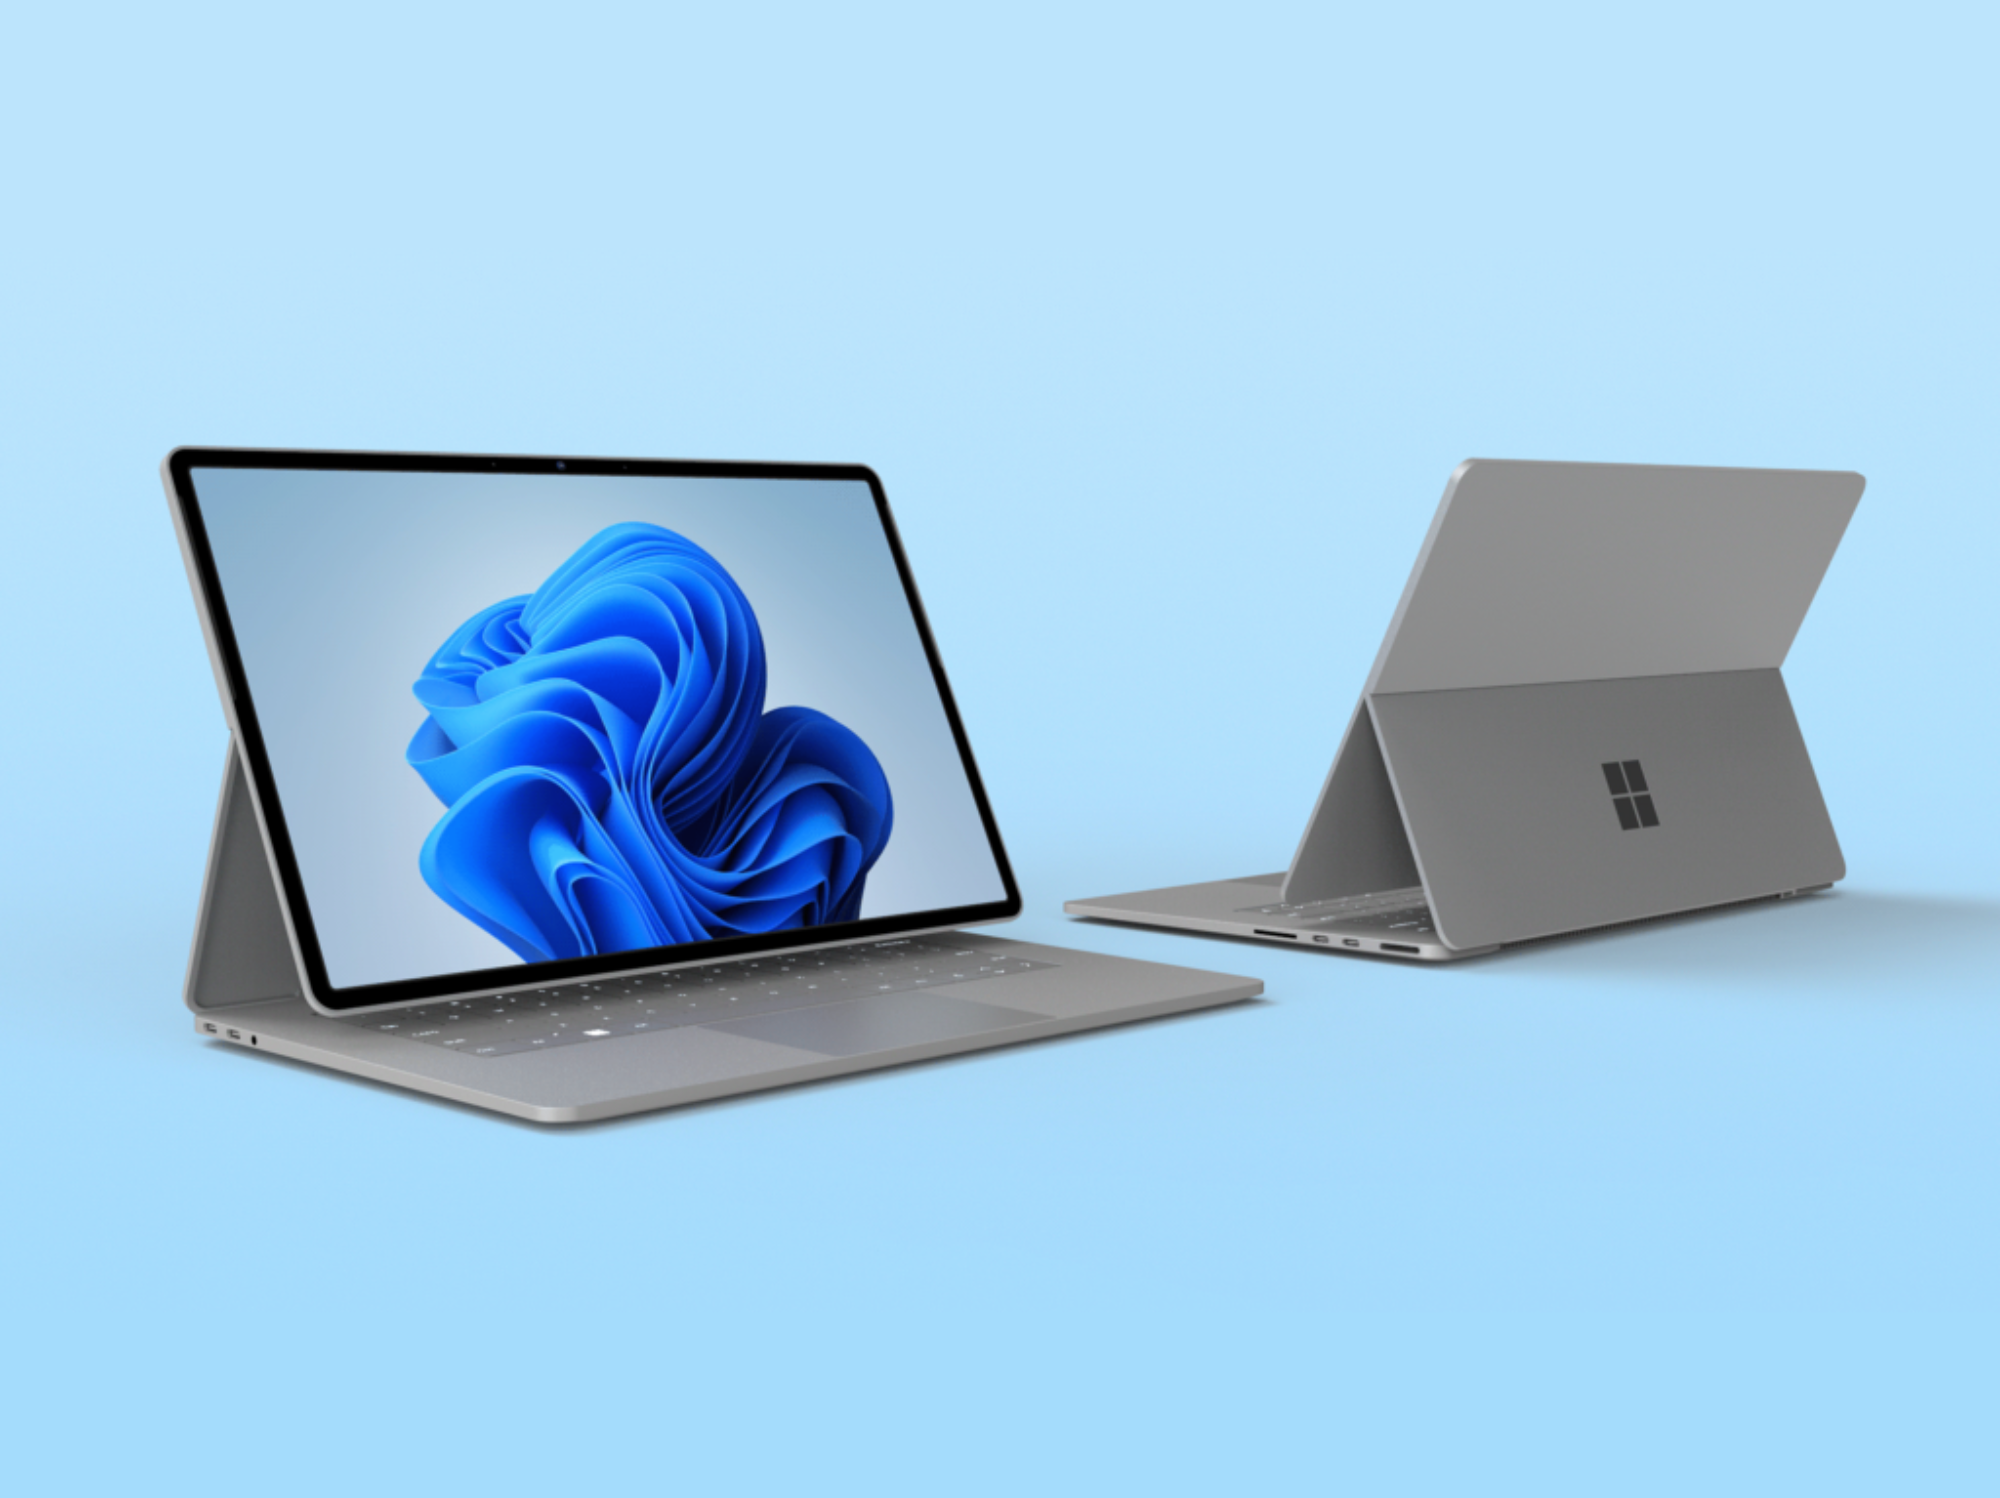 The Surface hardware we expect to see at Microsoft’s event tomorrow